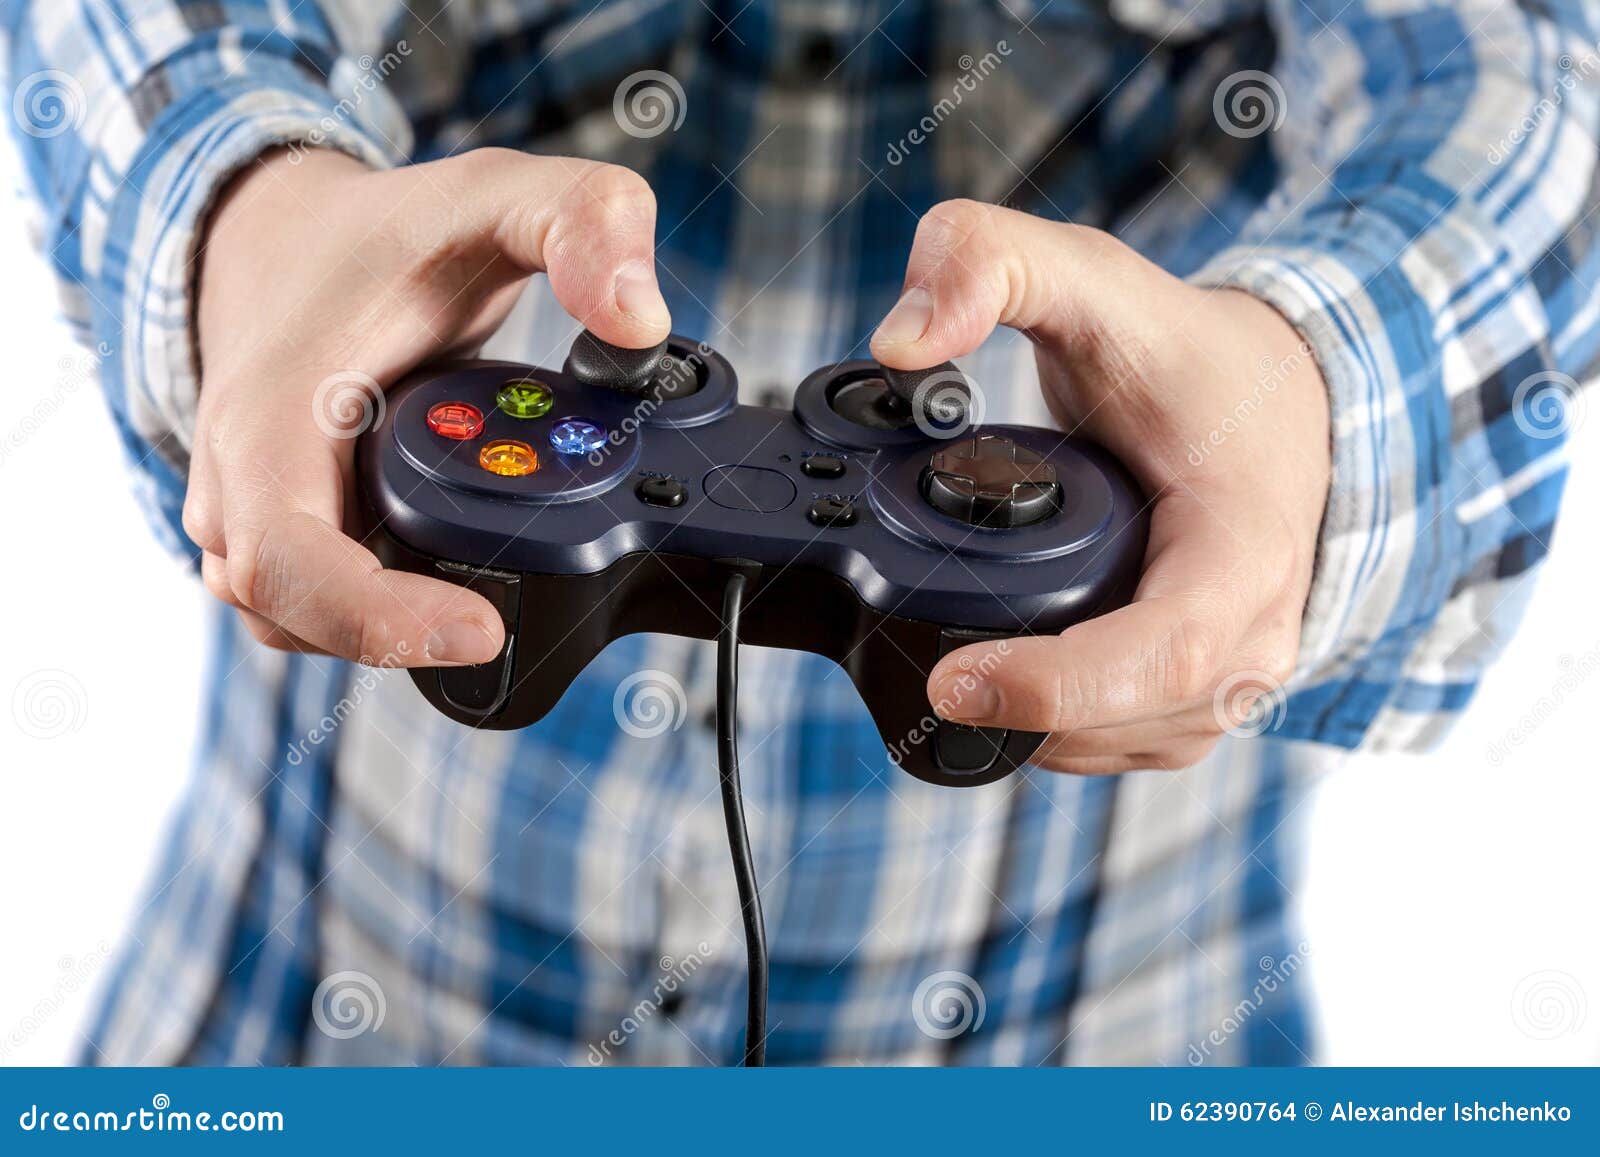 Joystick in hands photo. Image of cable 62390764